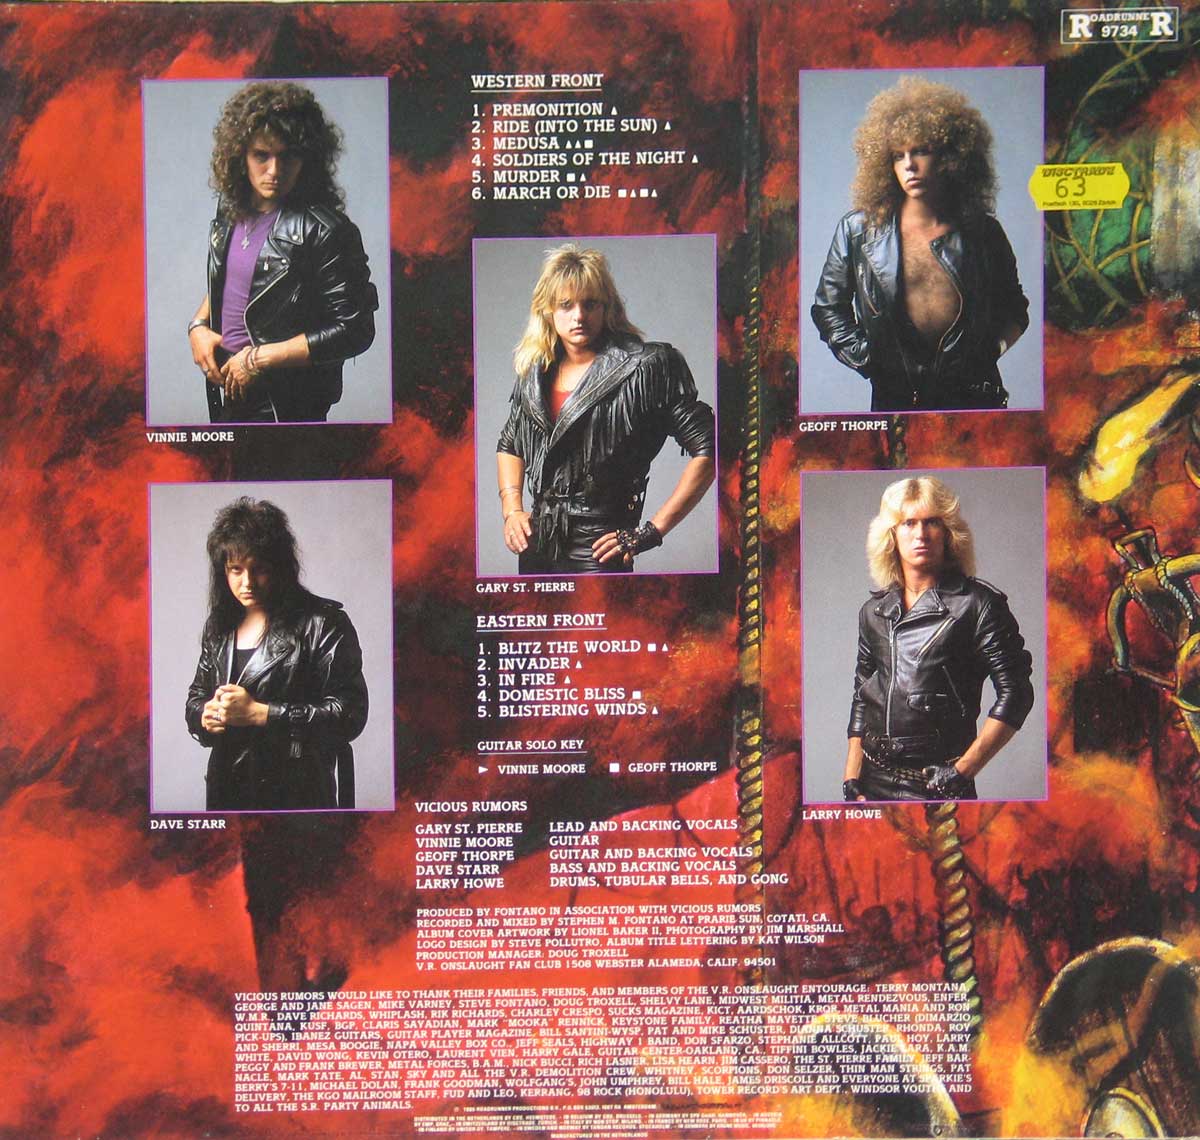 High Resolution Photo Album Back Cover of Vicious Rumors Soldiers of the Night https://vinyl-records.nl